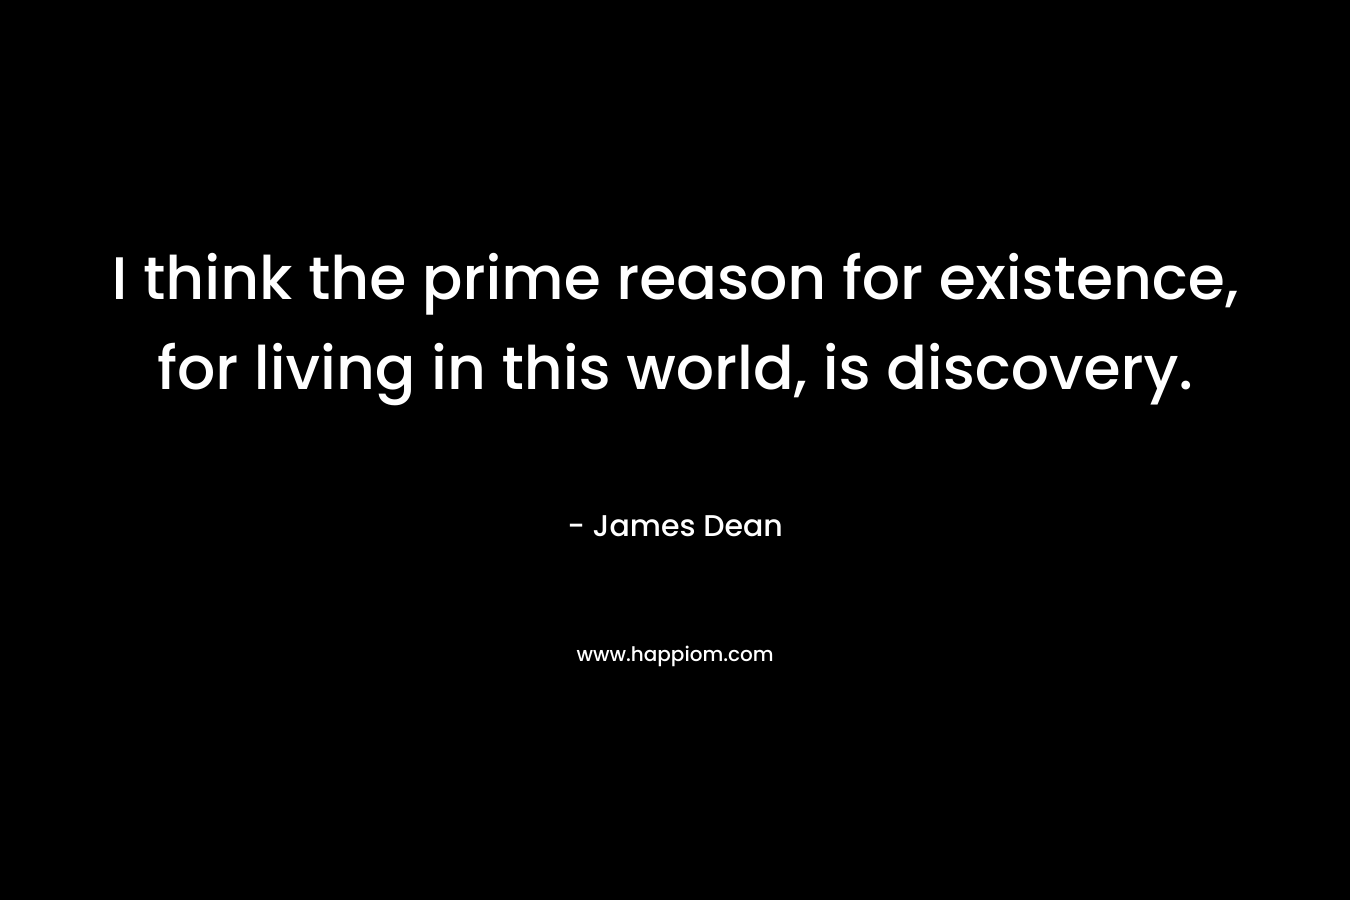 I think the prime reason for existence, for living in this world, is discovery.